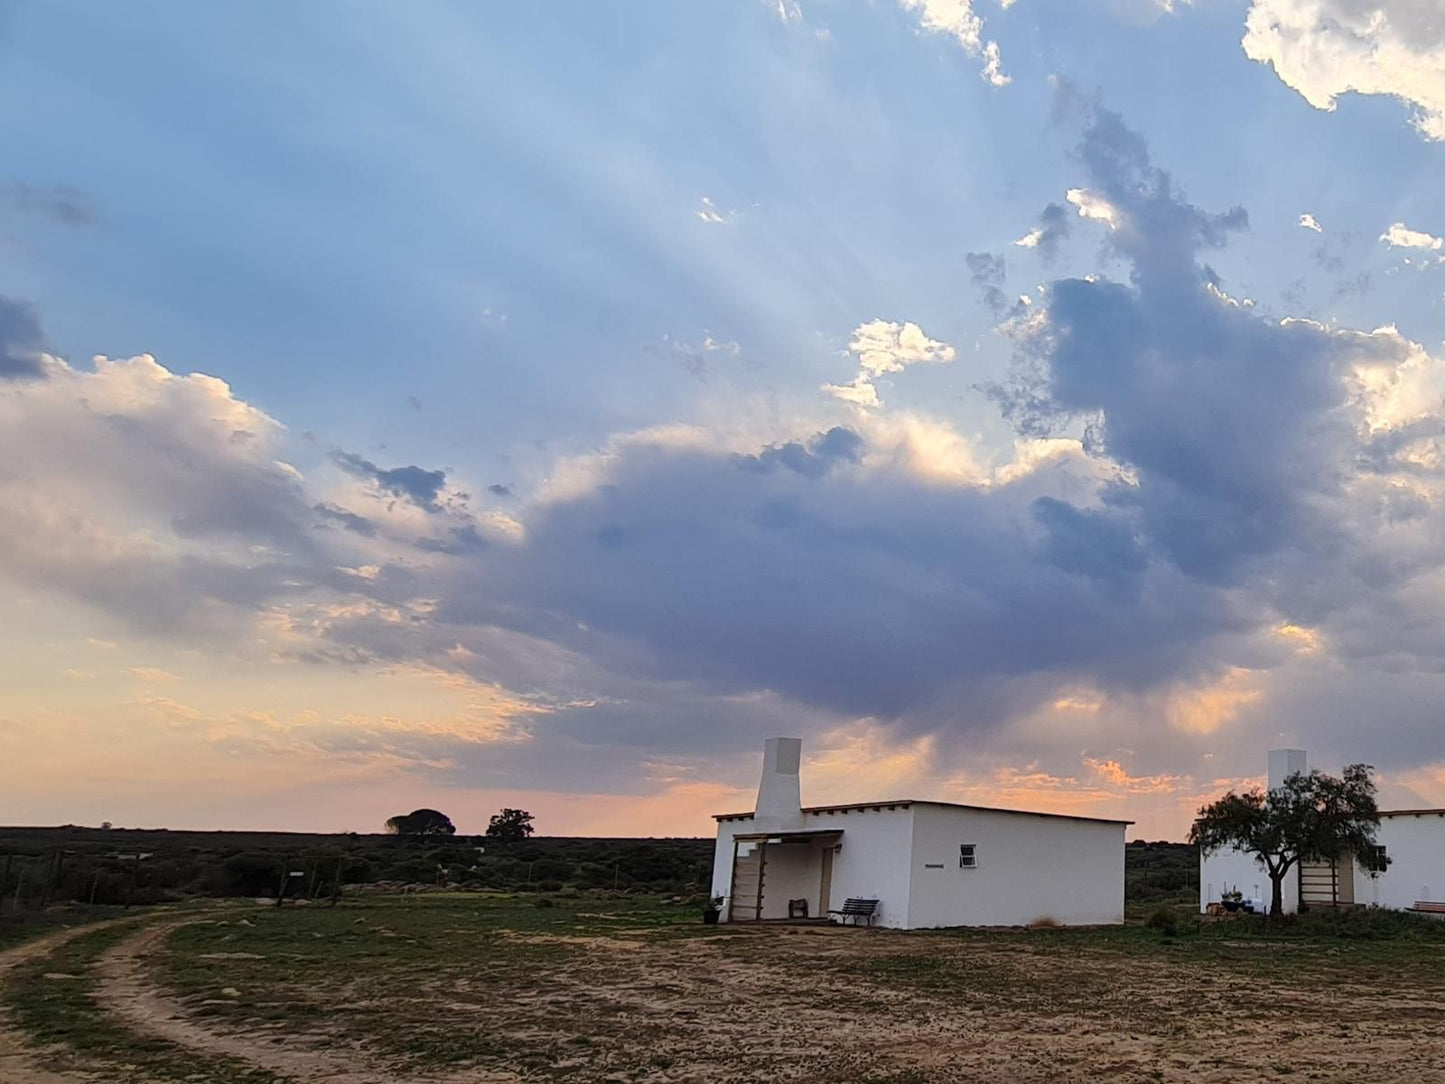 Willemsrivier Trekpad Guest Houses Nieuwoudtville Northern Cape South Africa Barn, Building, Architecture, Agriculture, Wood, Sky, Nature, Lowland